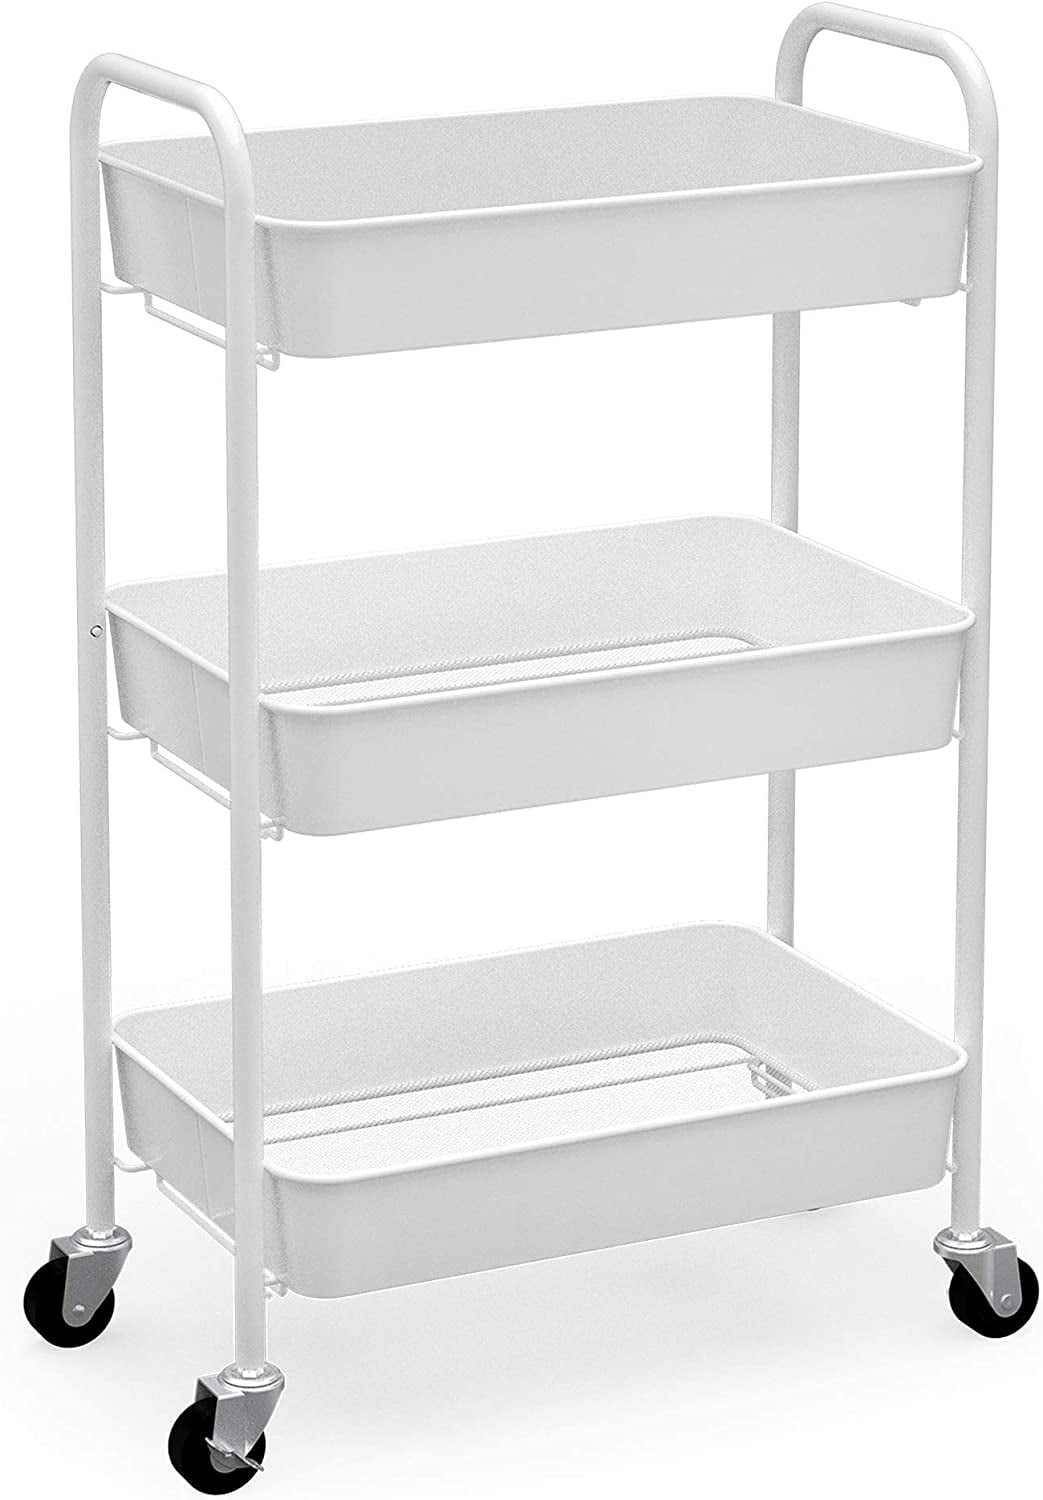 Kitchen Cart CAXXA 3-Tier Rolling Storage Organizer with Tabletop and 3 Small Baskets Mobile Utility Cart White Printer Cart 